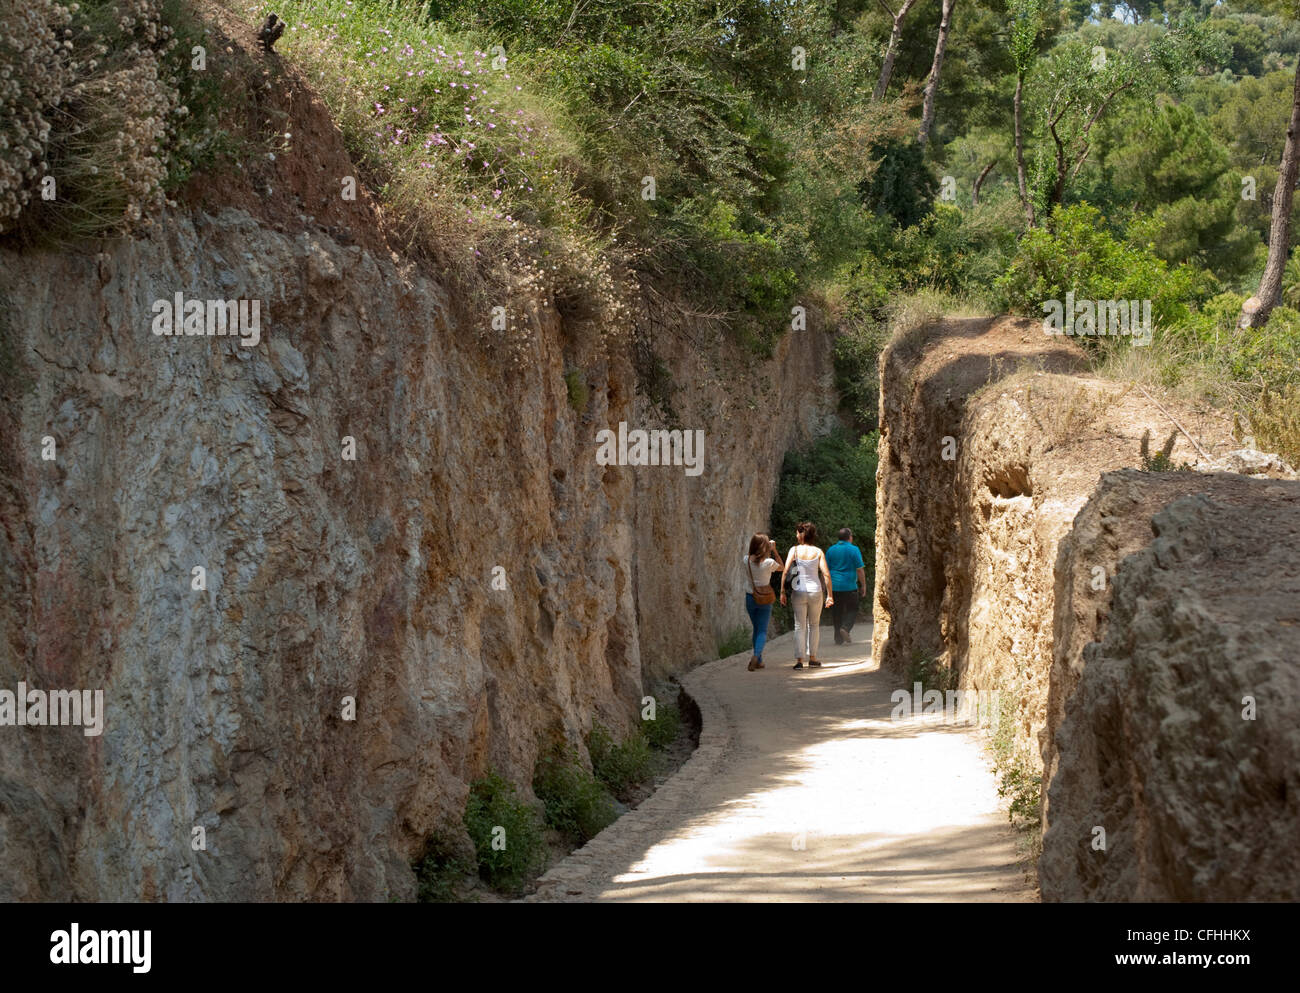 Tourists walk in the curved sculpted walkways in the gardens at Park Guell, Barcelona Stock Photo